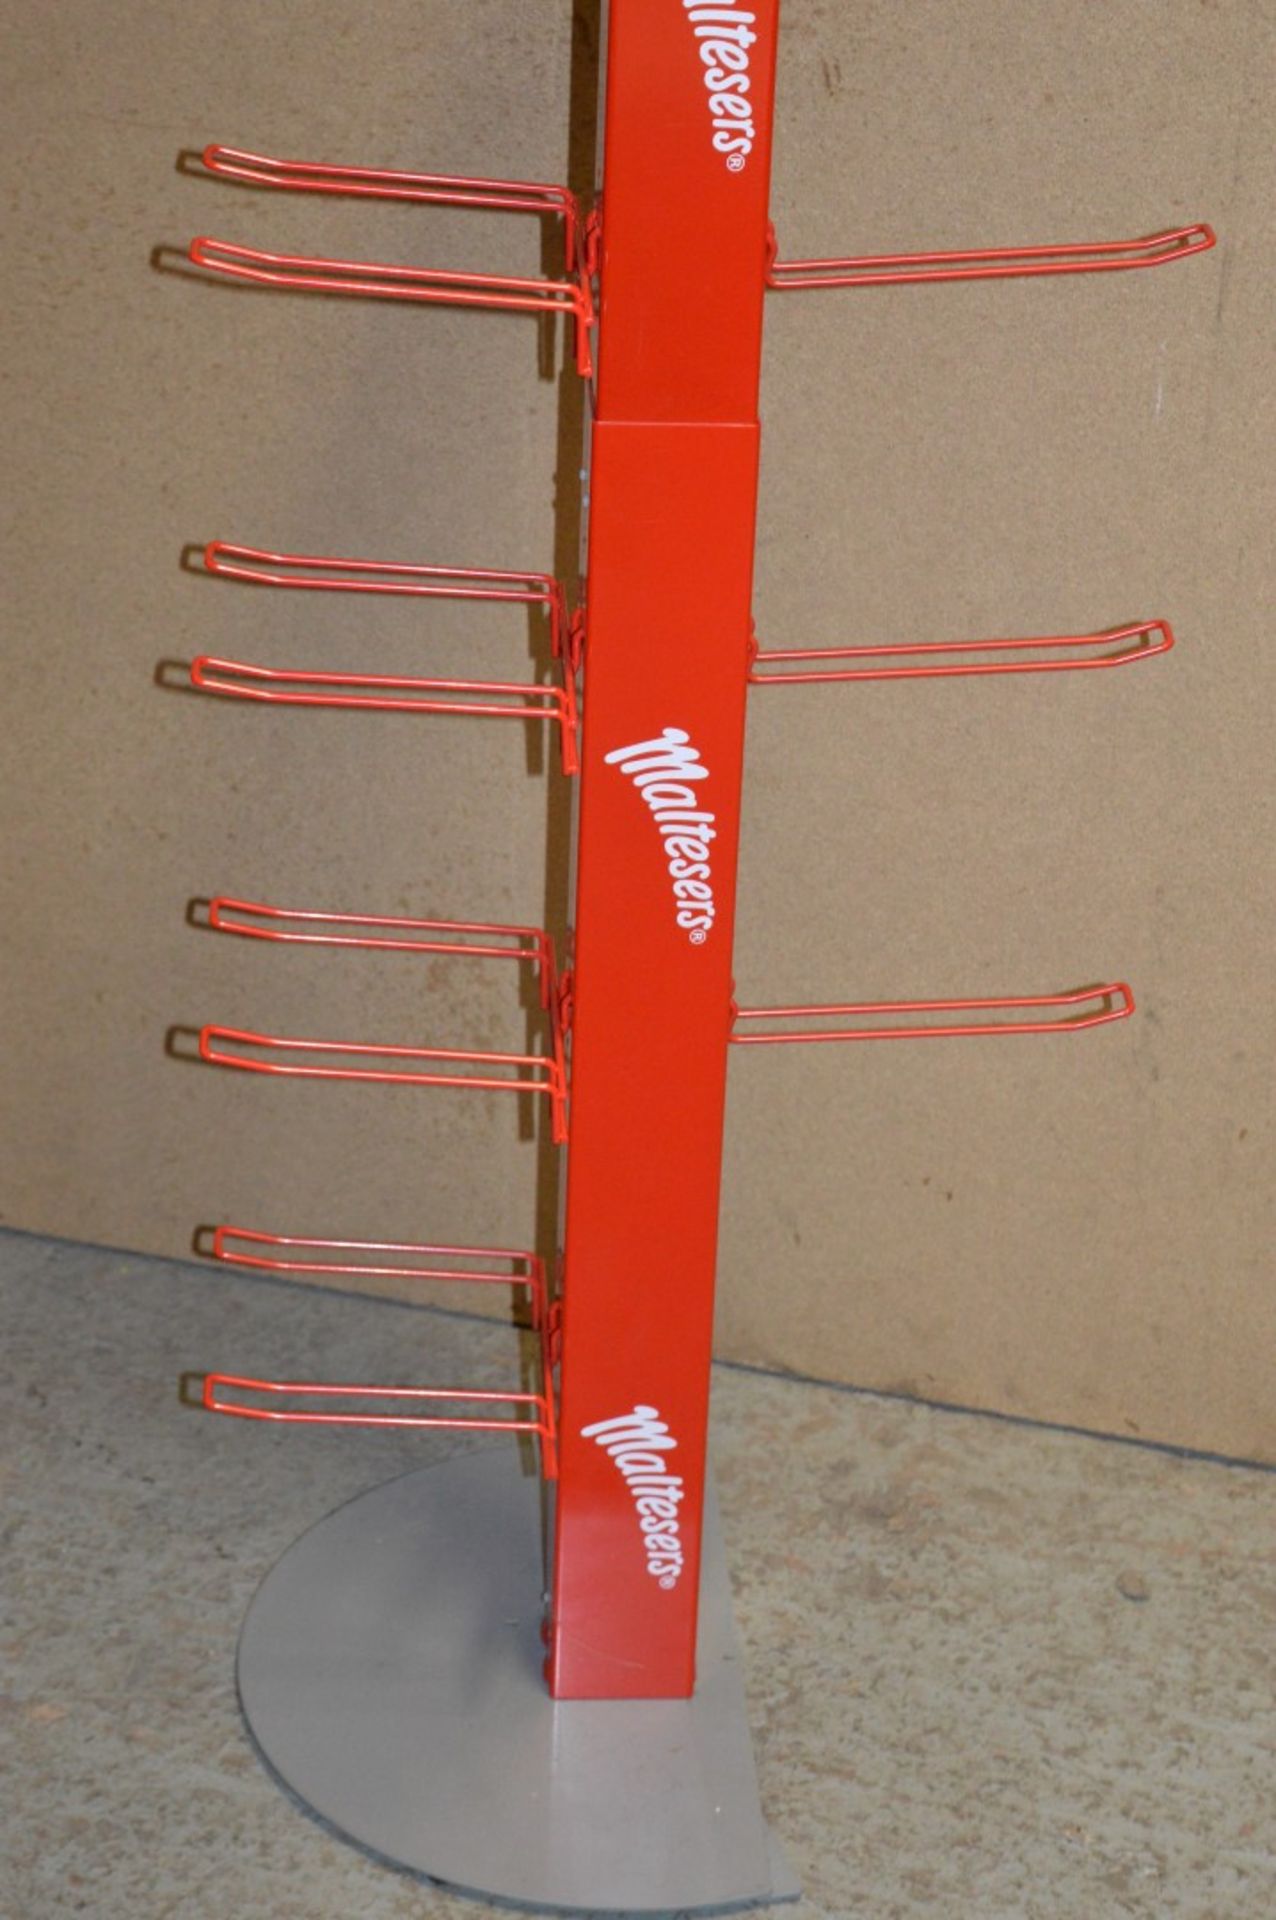 1 x Maltesers Merchandise Shop Display Stand - Approx Height 140cms - CL282 - Ref MS163 - - Image 5 of 7